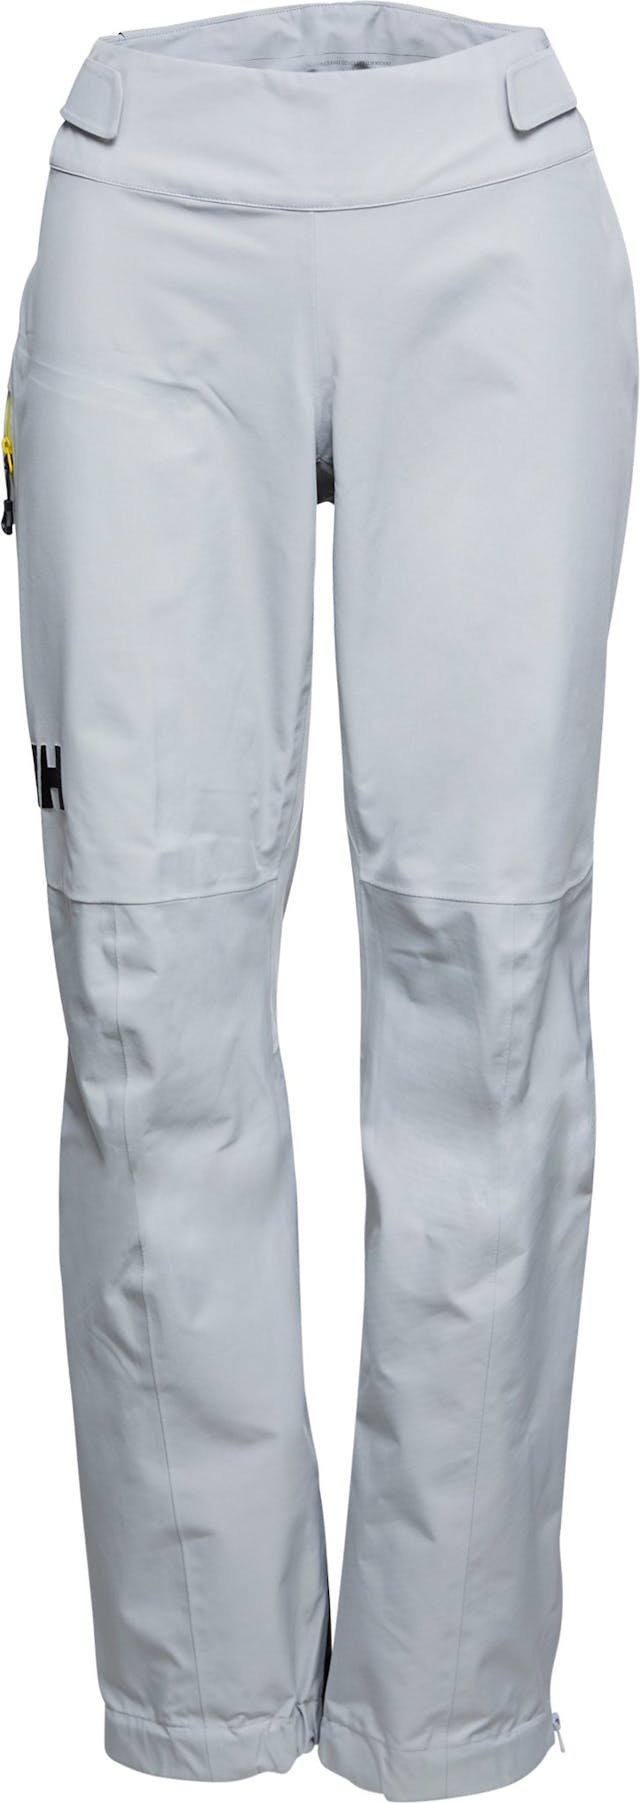 Product image for Odin 9 Worlds Inifinity Shell Pant - Women's